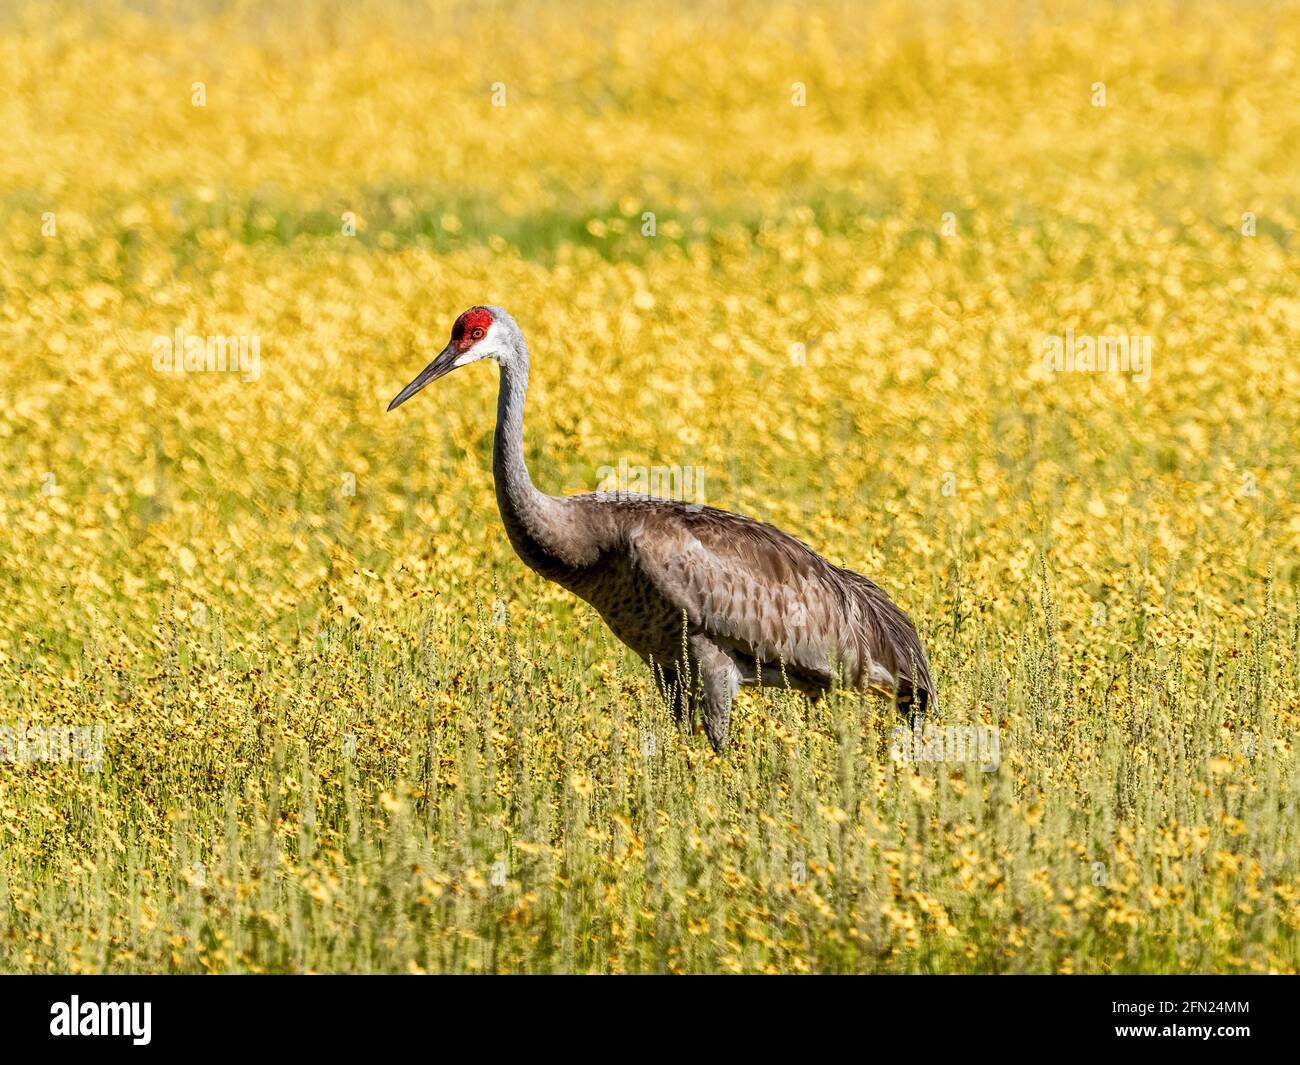 Sandhill Crane in the  Coreopsis or Tickseed wildflowers in  the Big Flats area of Myakka River State Park in Sarasota Florida USA Stock Photo